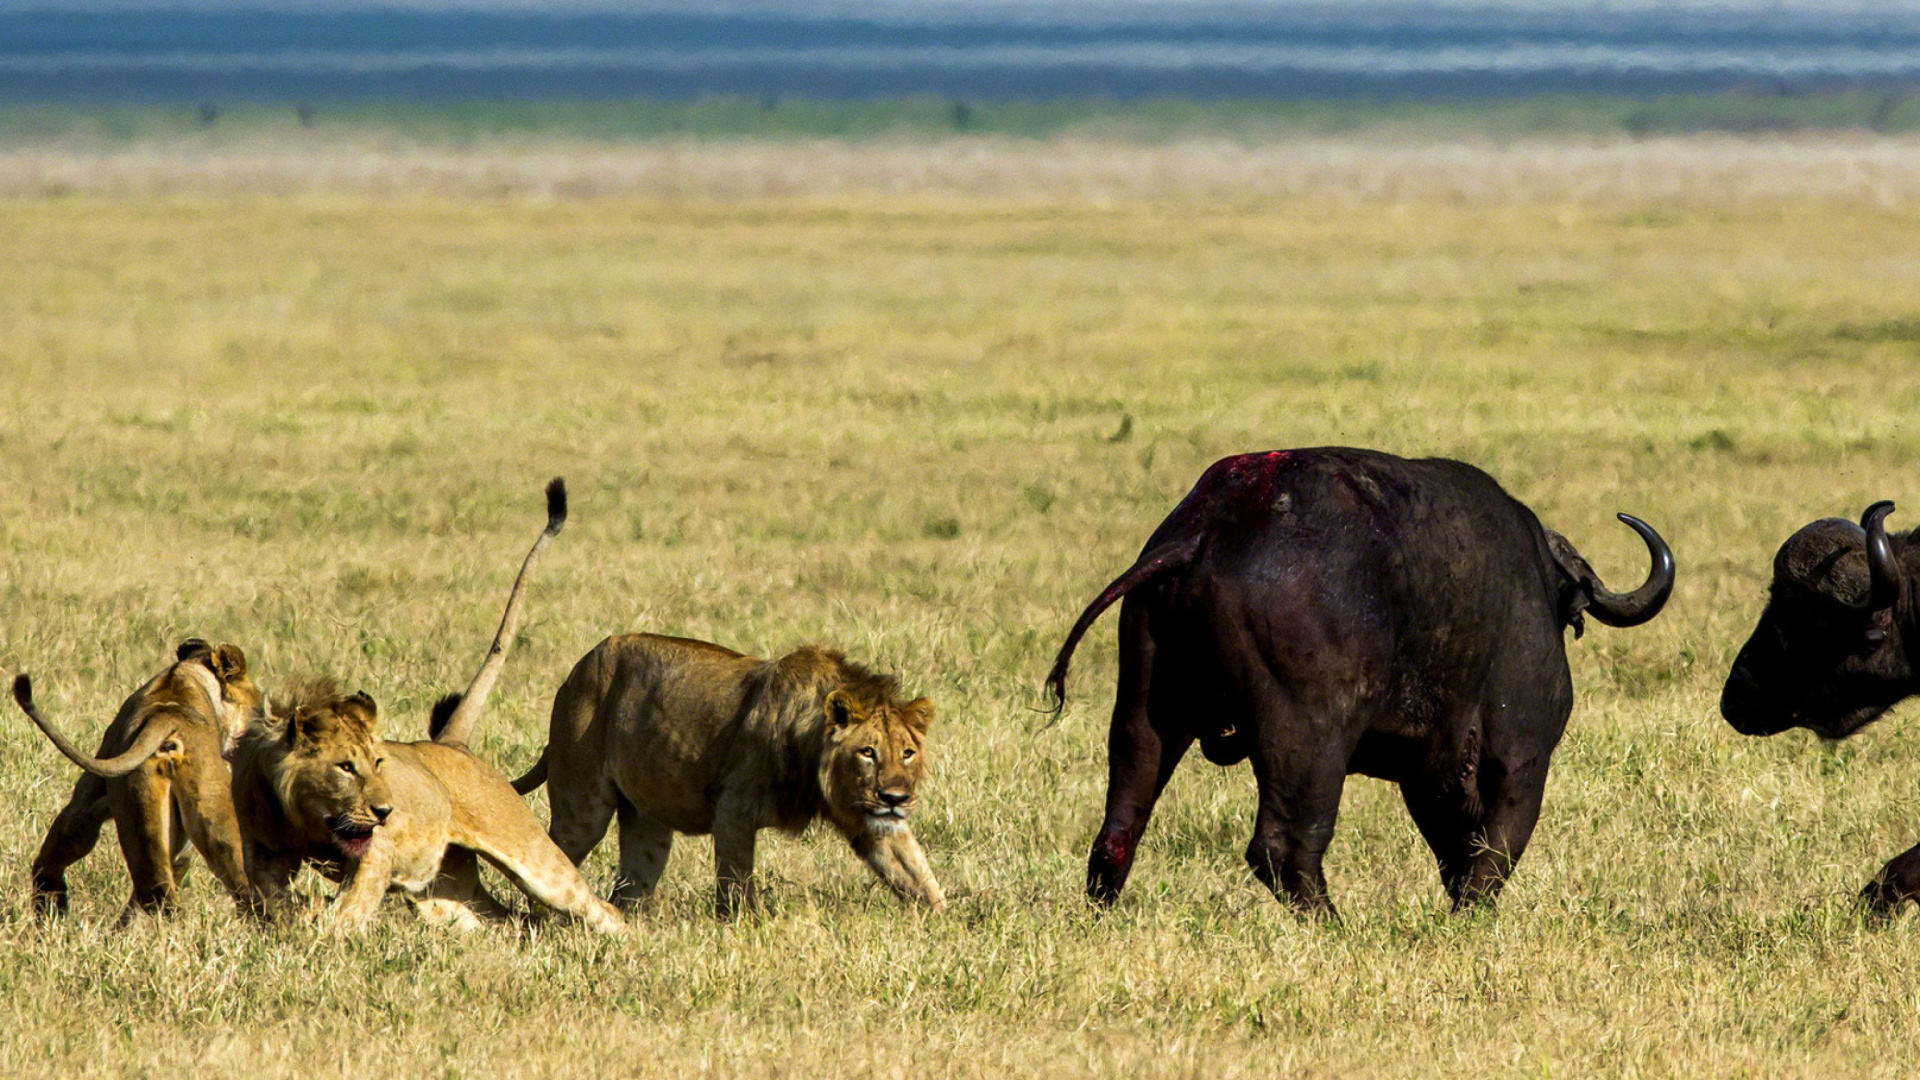 Lions and Buffaloes wallpaper 1920x1080